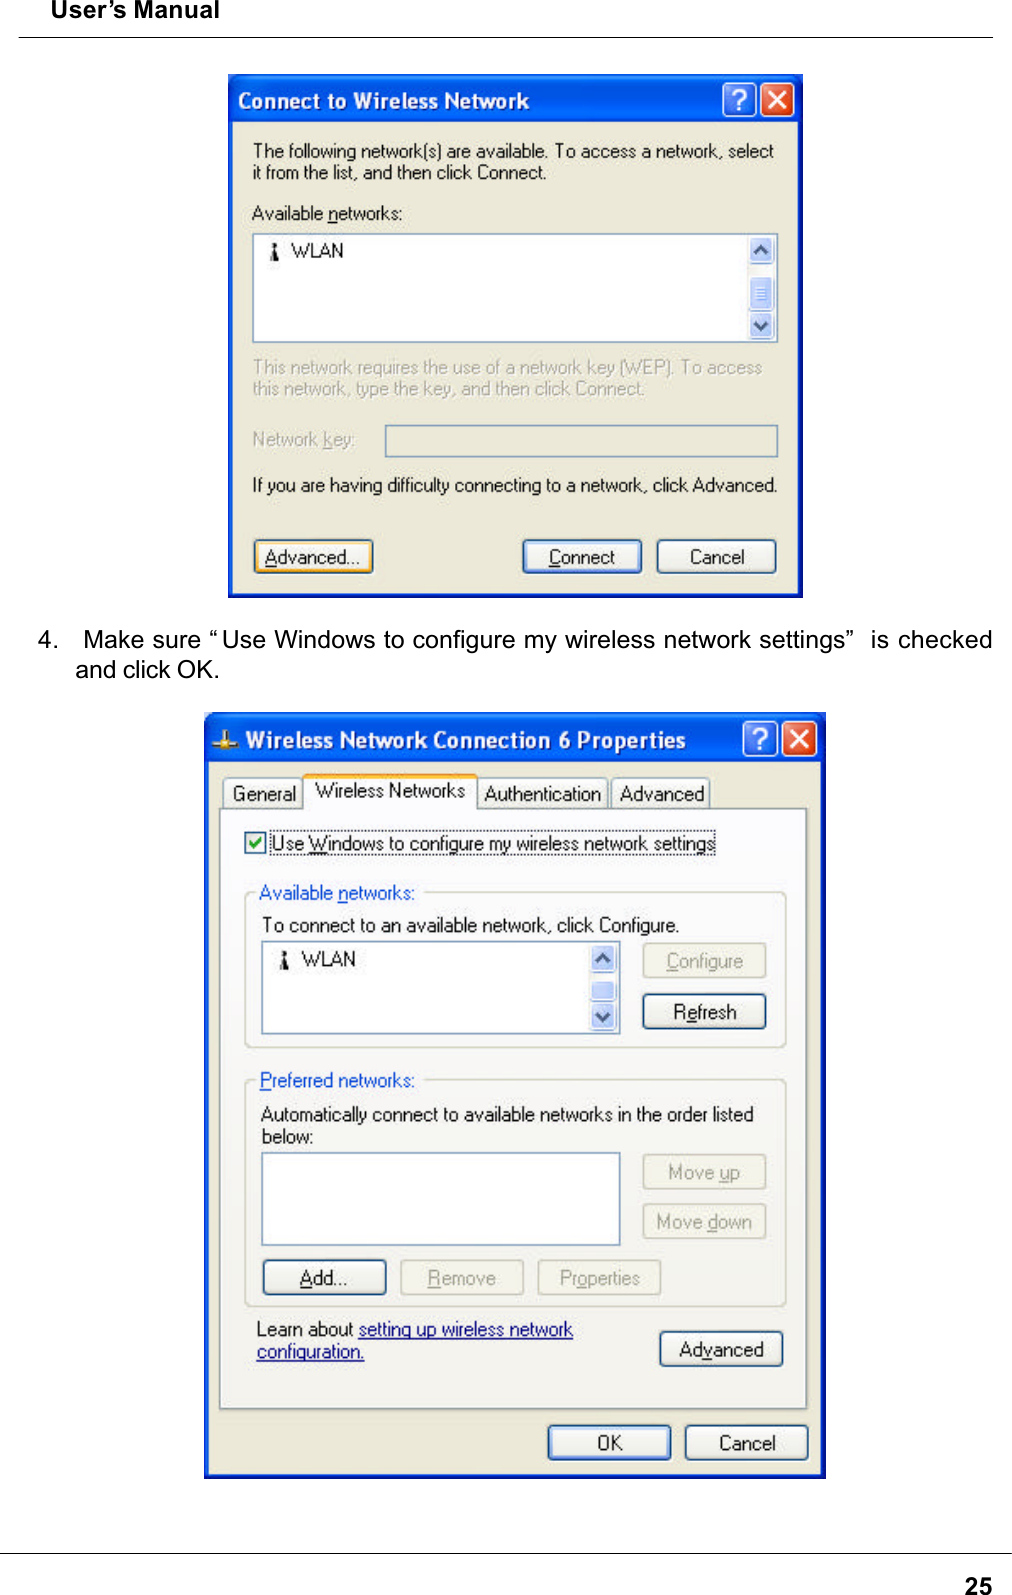  User’s Manual254.  Make sure “ Use Windows to configure my wireless network settings”   is checked and click OK.